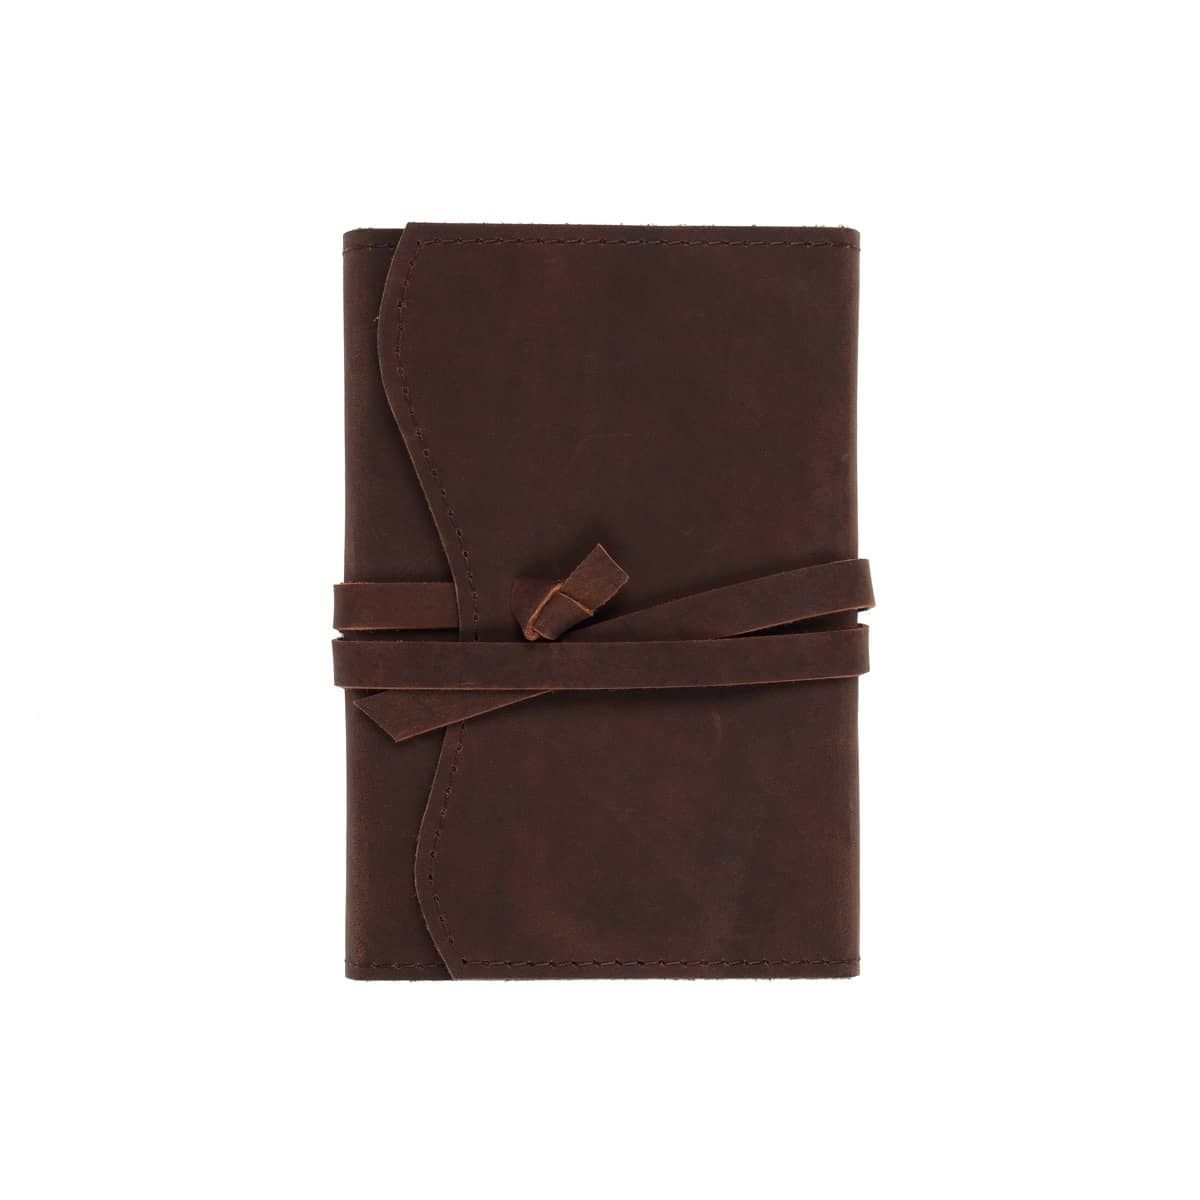 Dark Brown Leather Journal with Wrap - 4x6